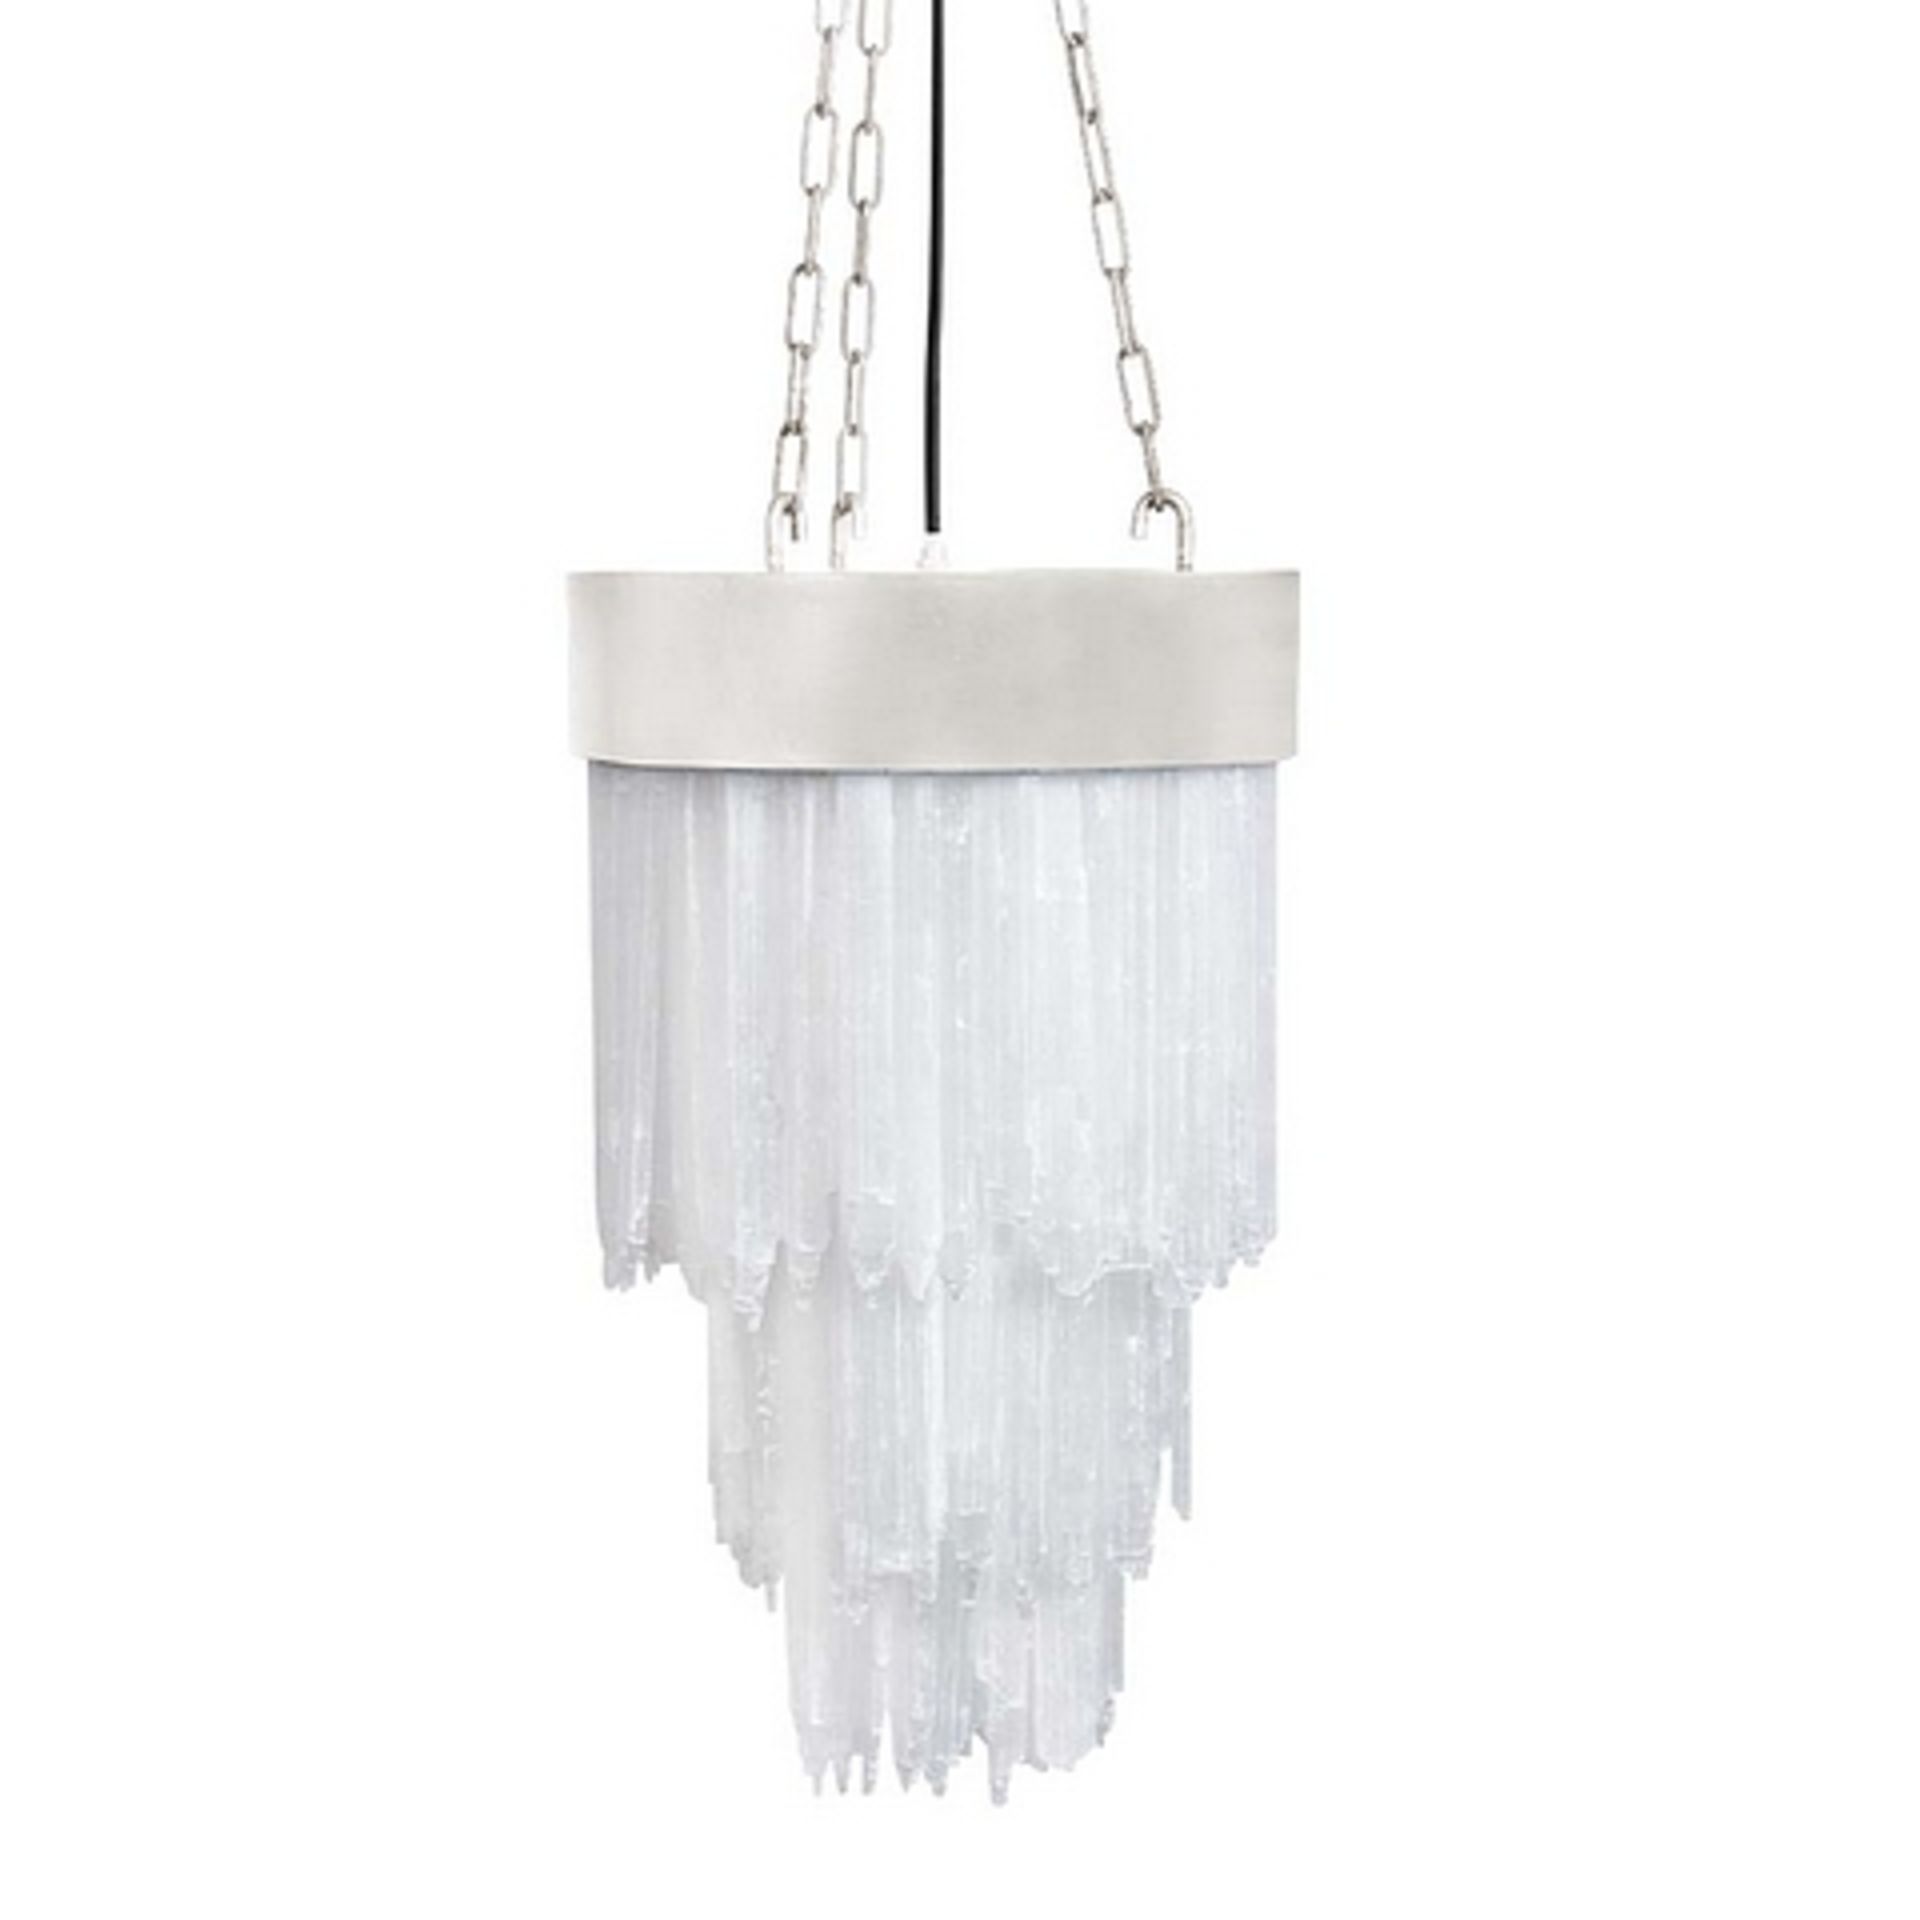 Hanging lamp selenite chandelier small chandelier in white powder coating finish with selenite